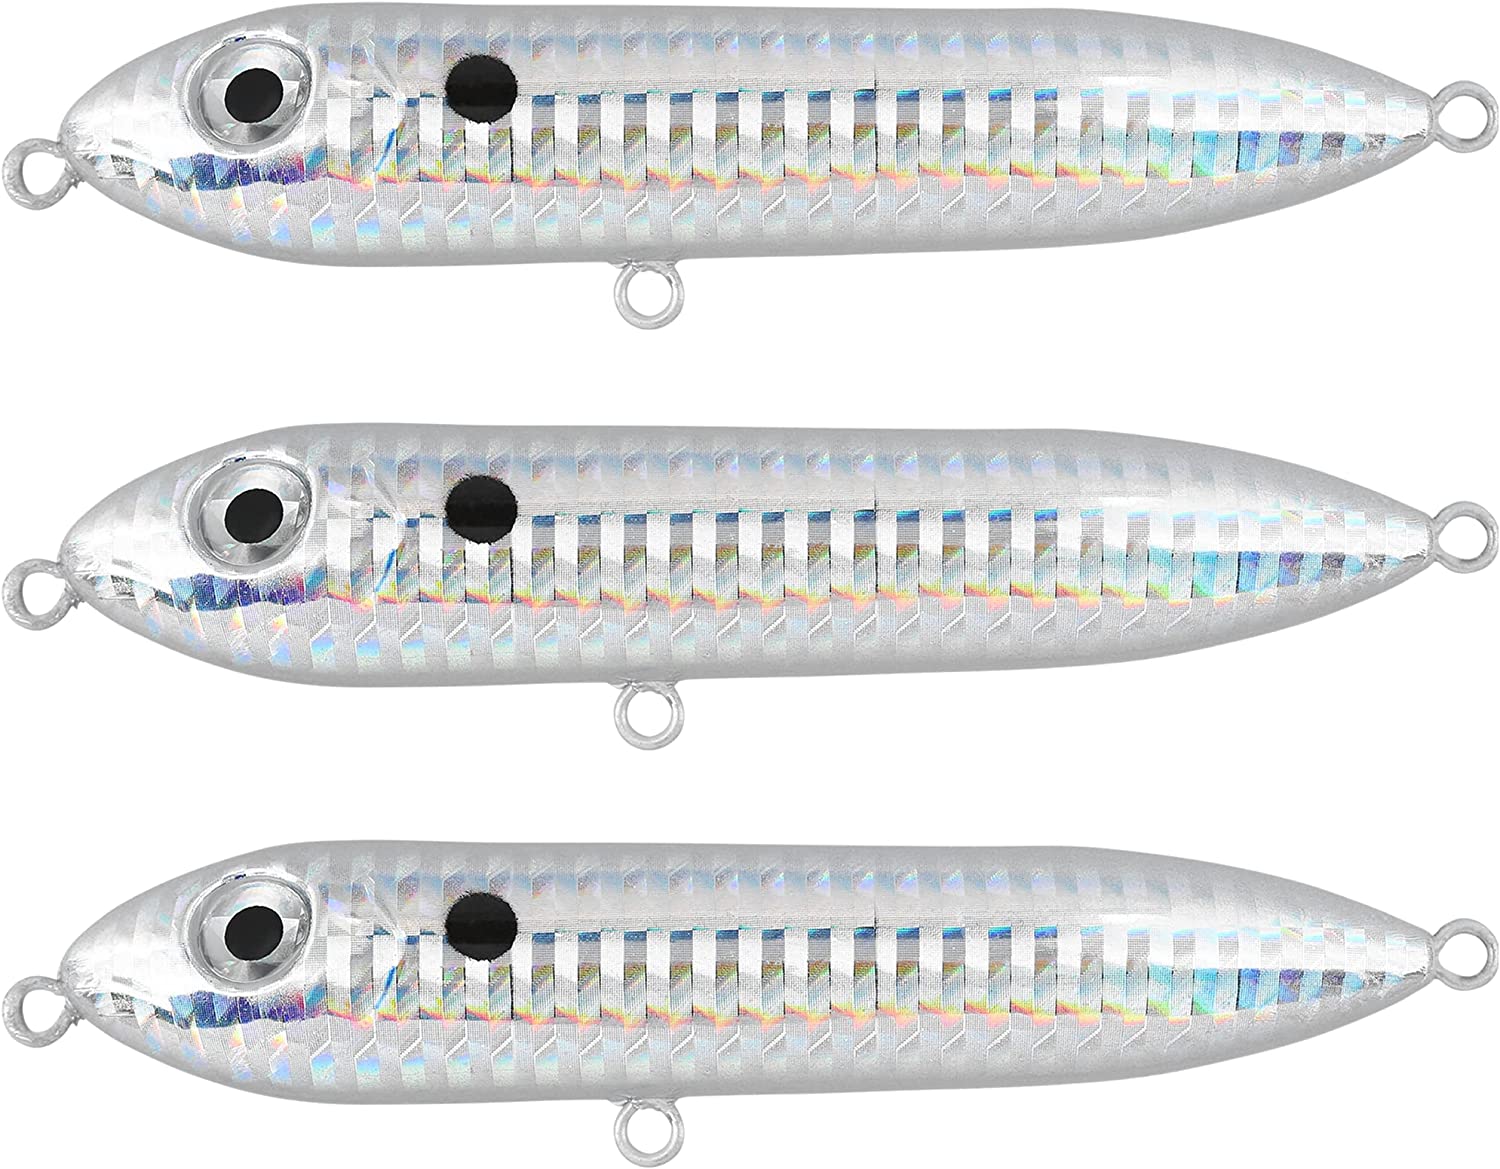 Dr.Fish 5 Pack Catfish Float Rigs Fishing Popping Cork Float